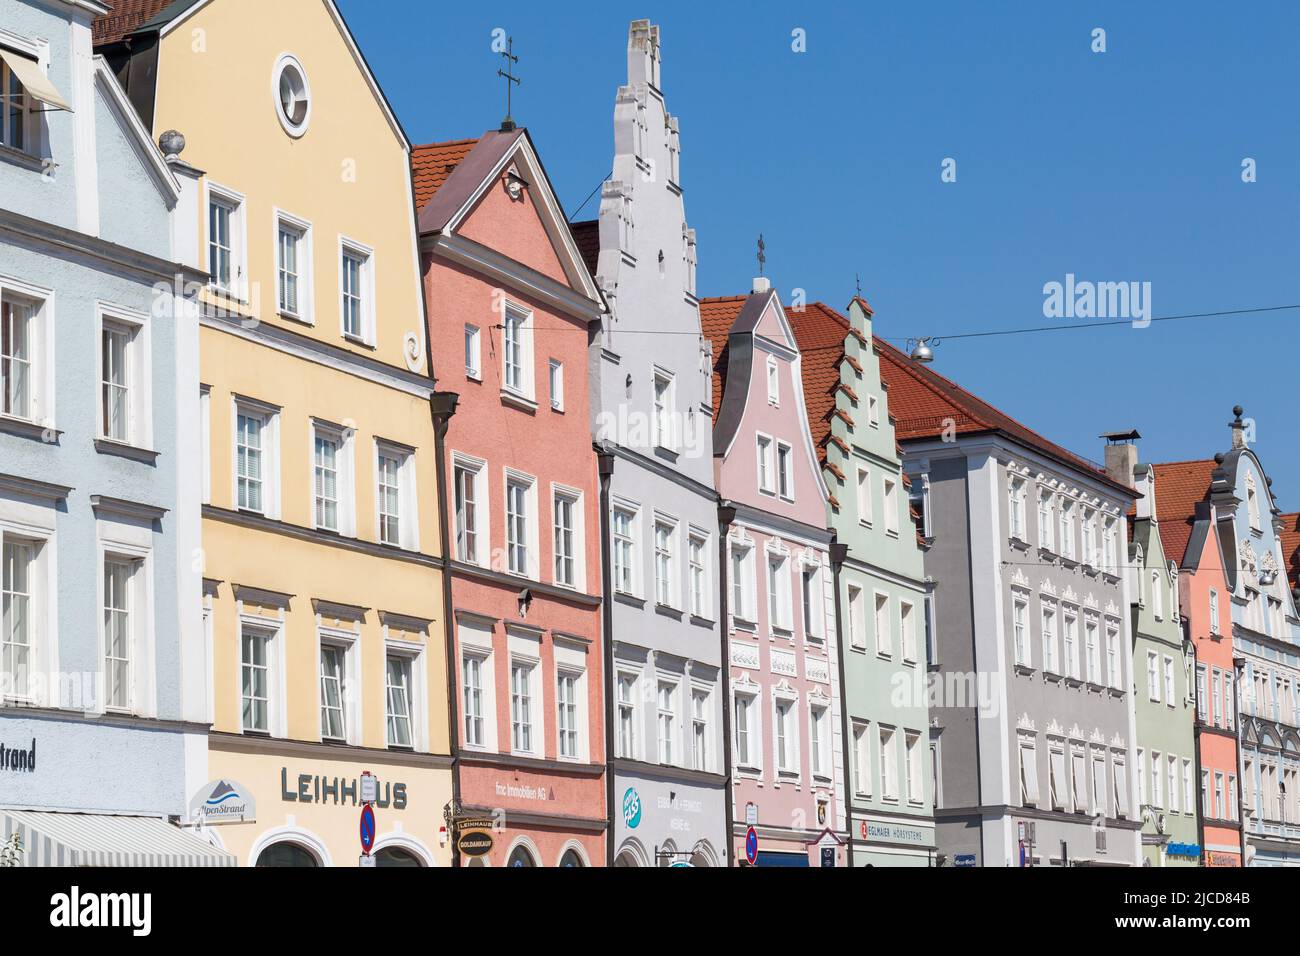 Landshut, Germany - Aug 15, 2021: A closer view on the historical facades of Landhut's old town. Stock Photo